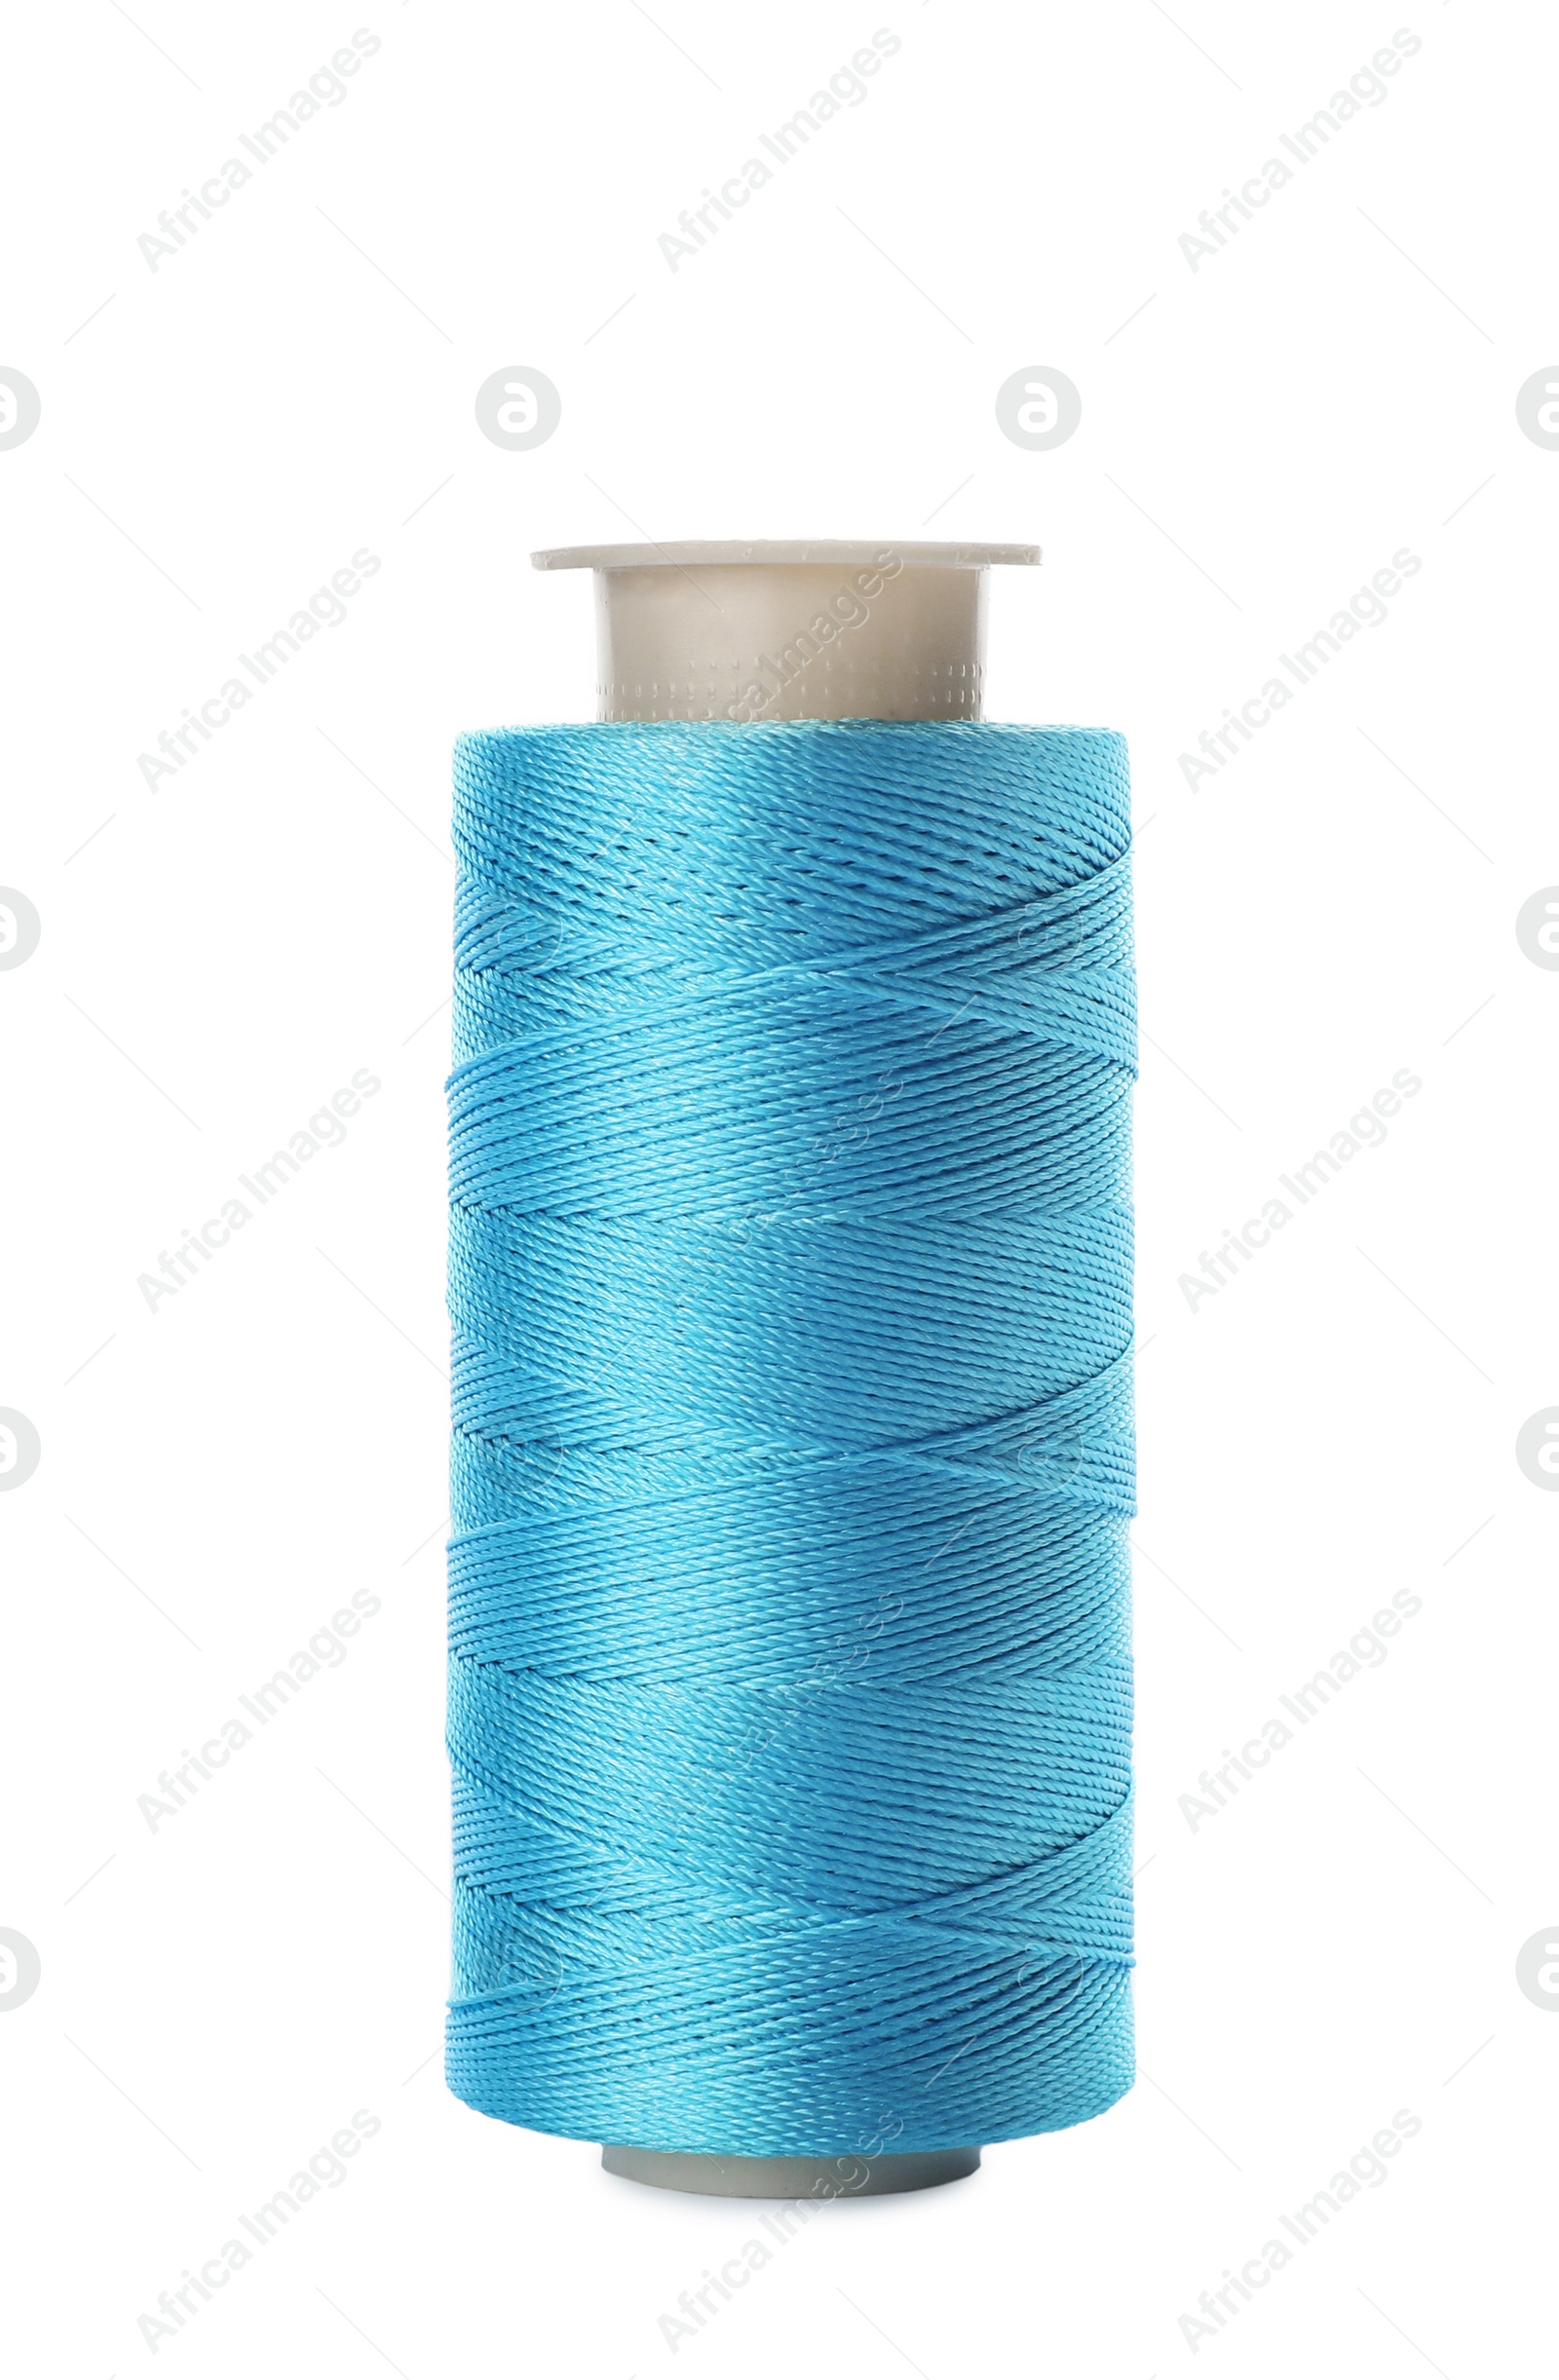 Photo of Color sewing thread on white background